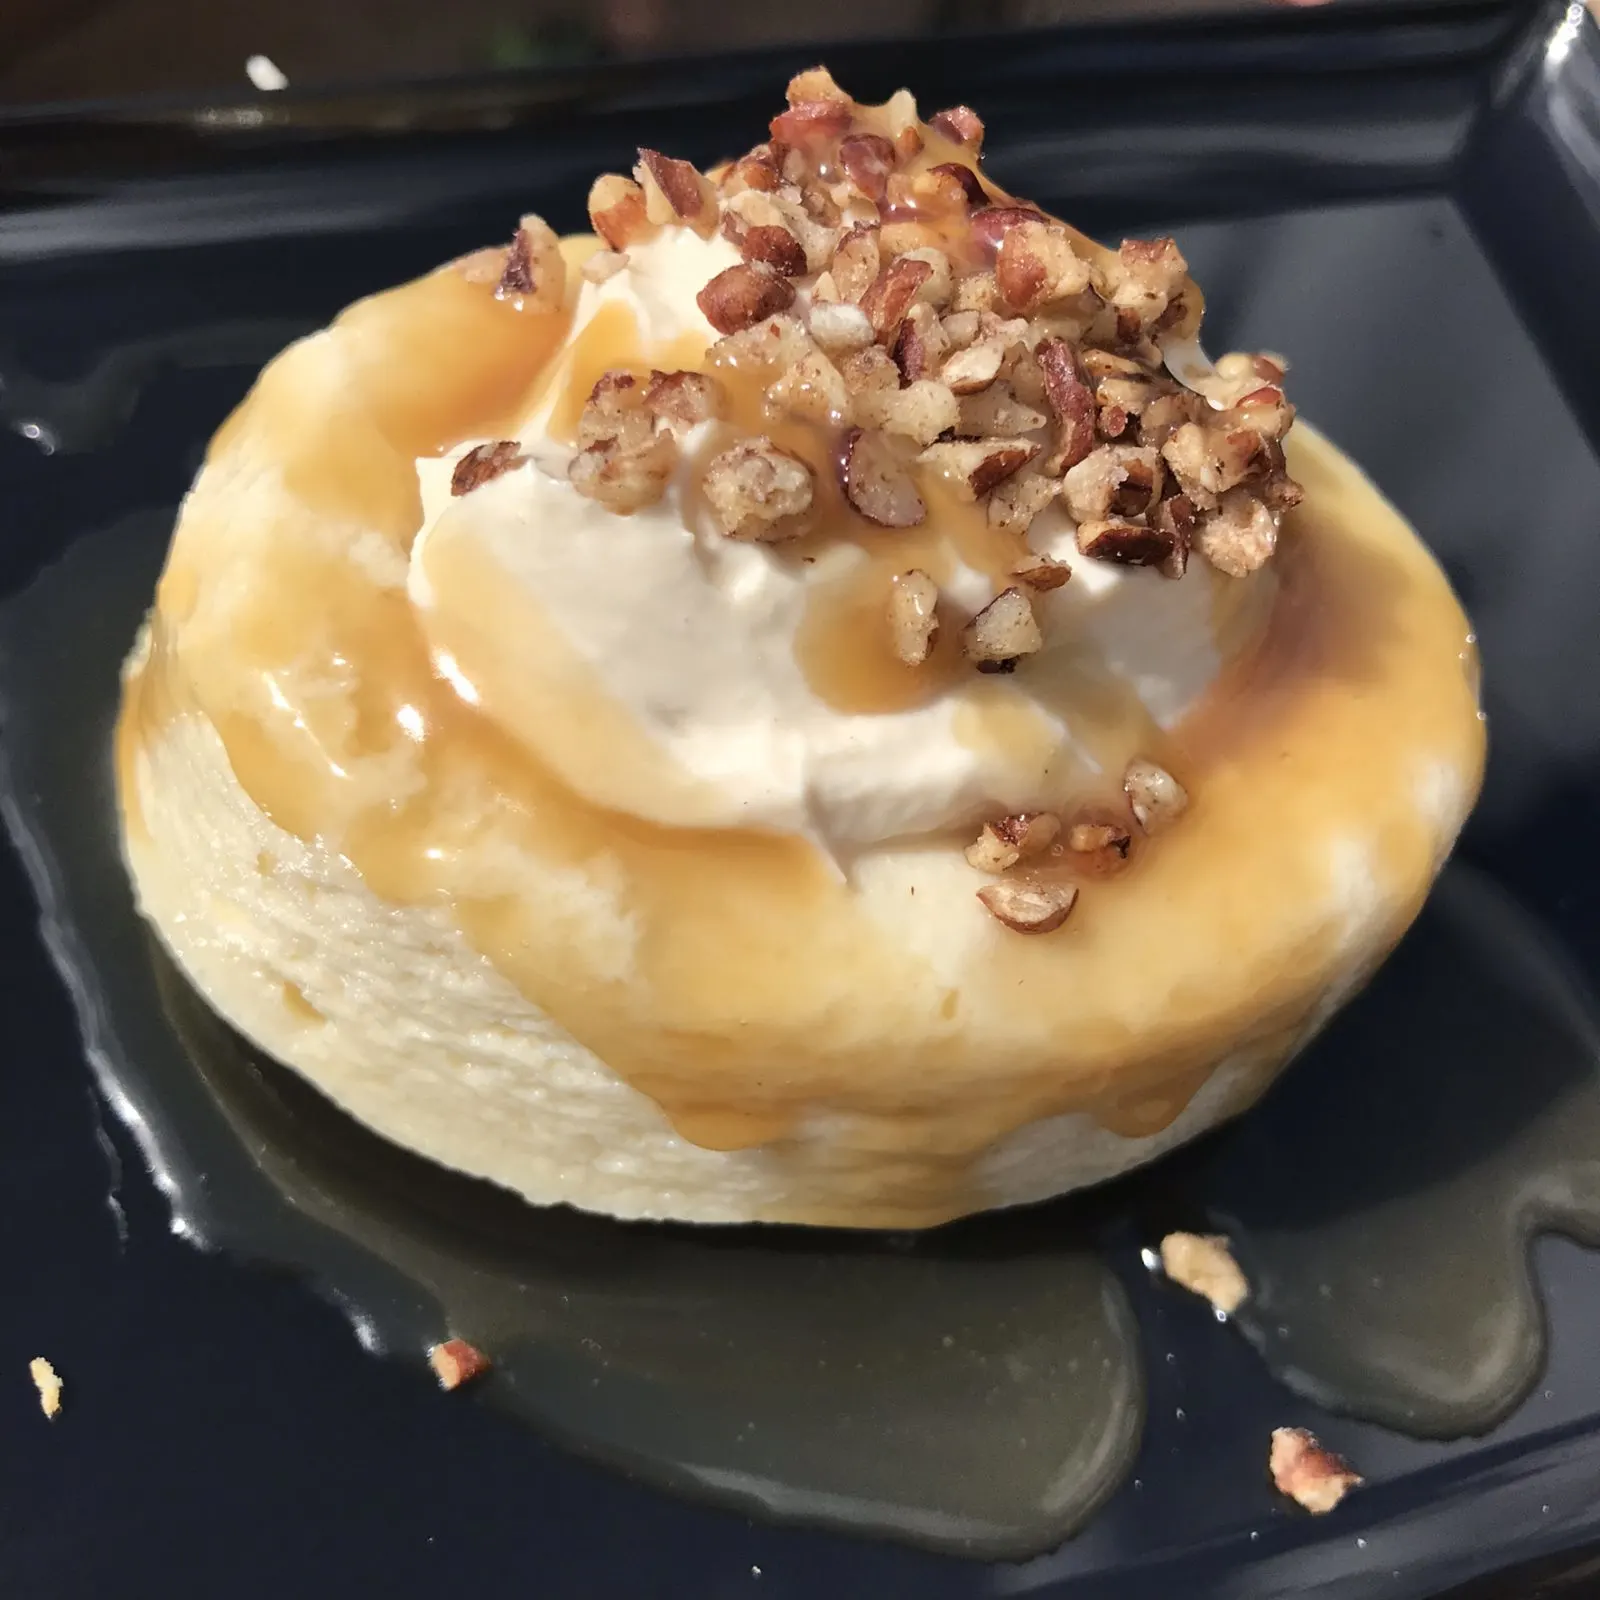 Maple Bourbon Boursin Cheesecake with Caramel and Pecan Crunch from epcot food and wine festival